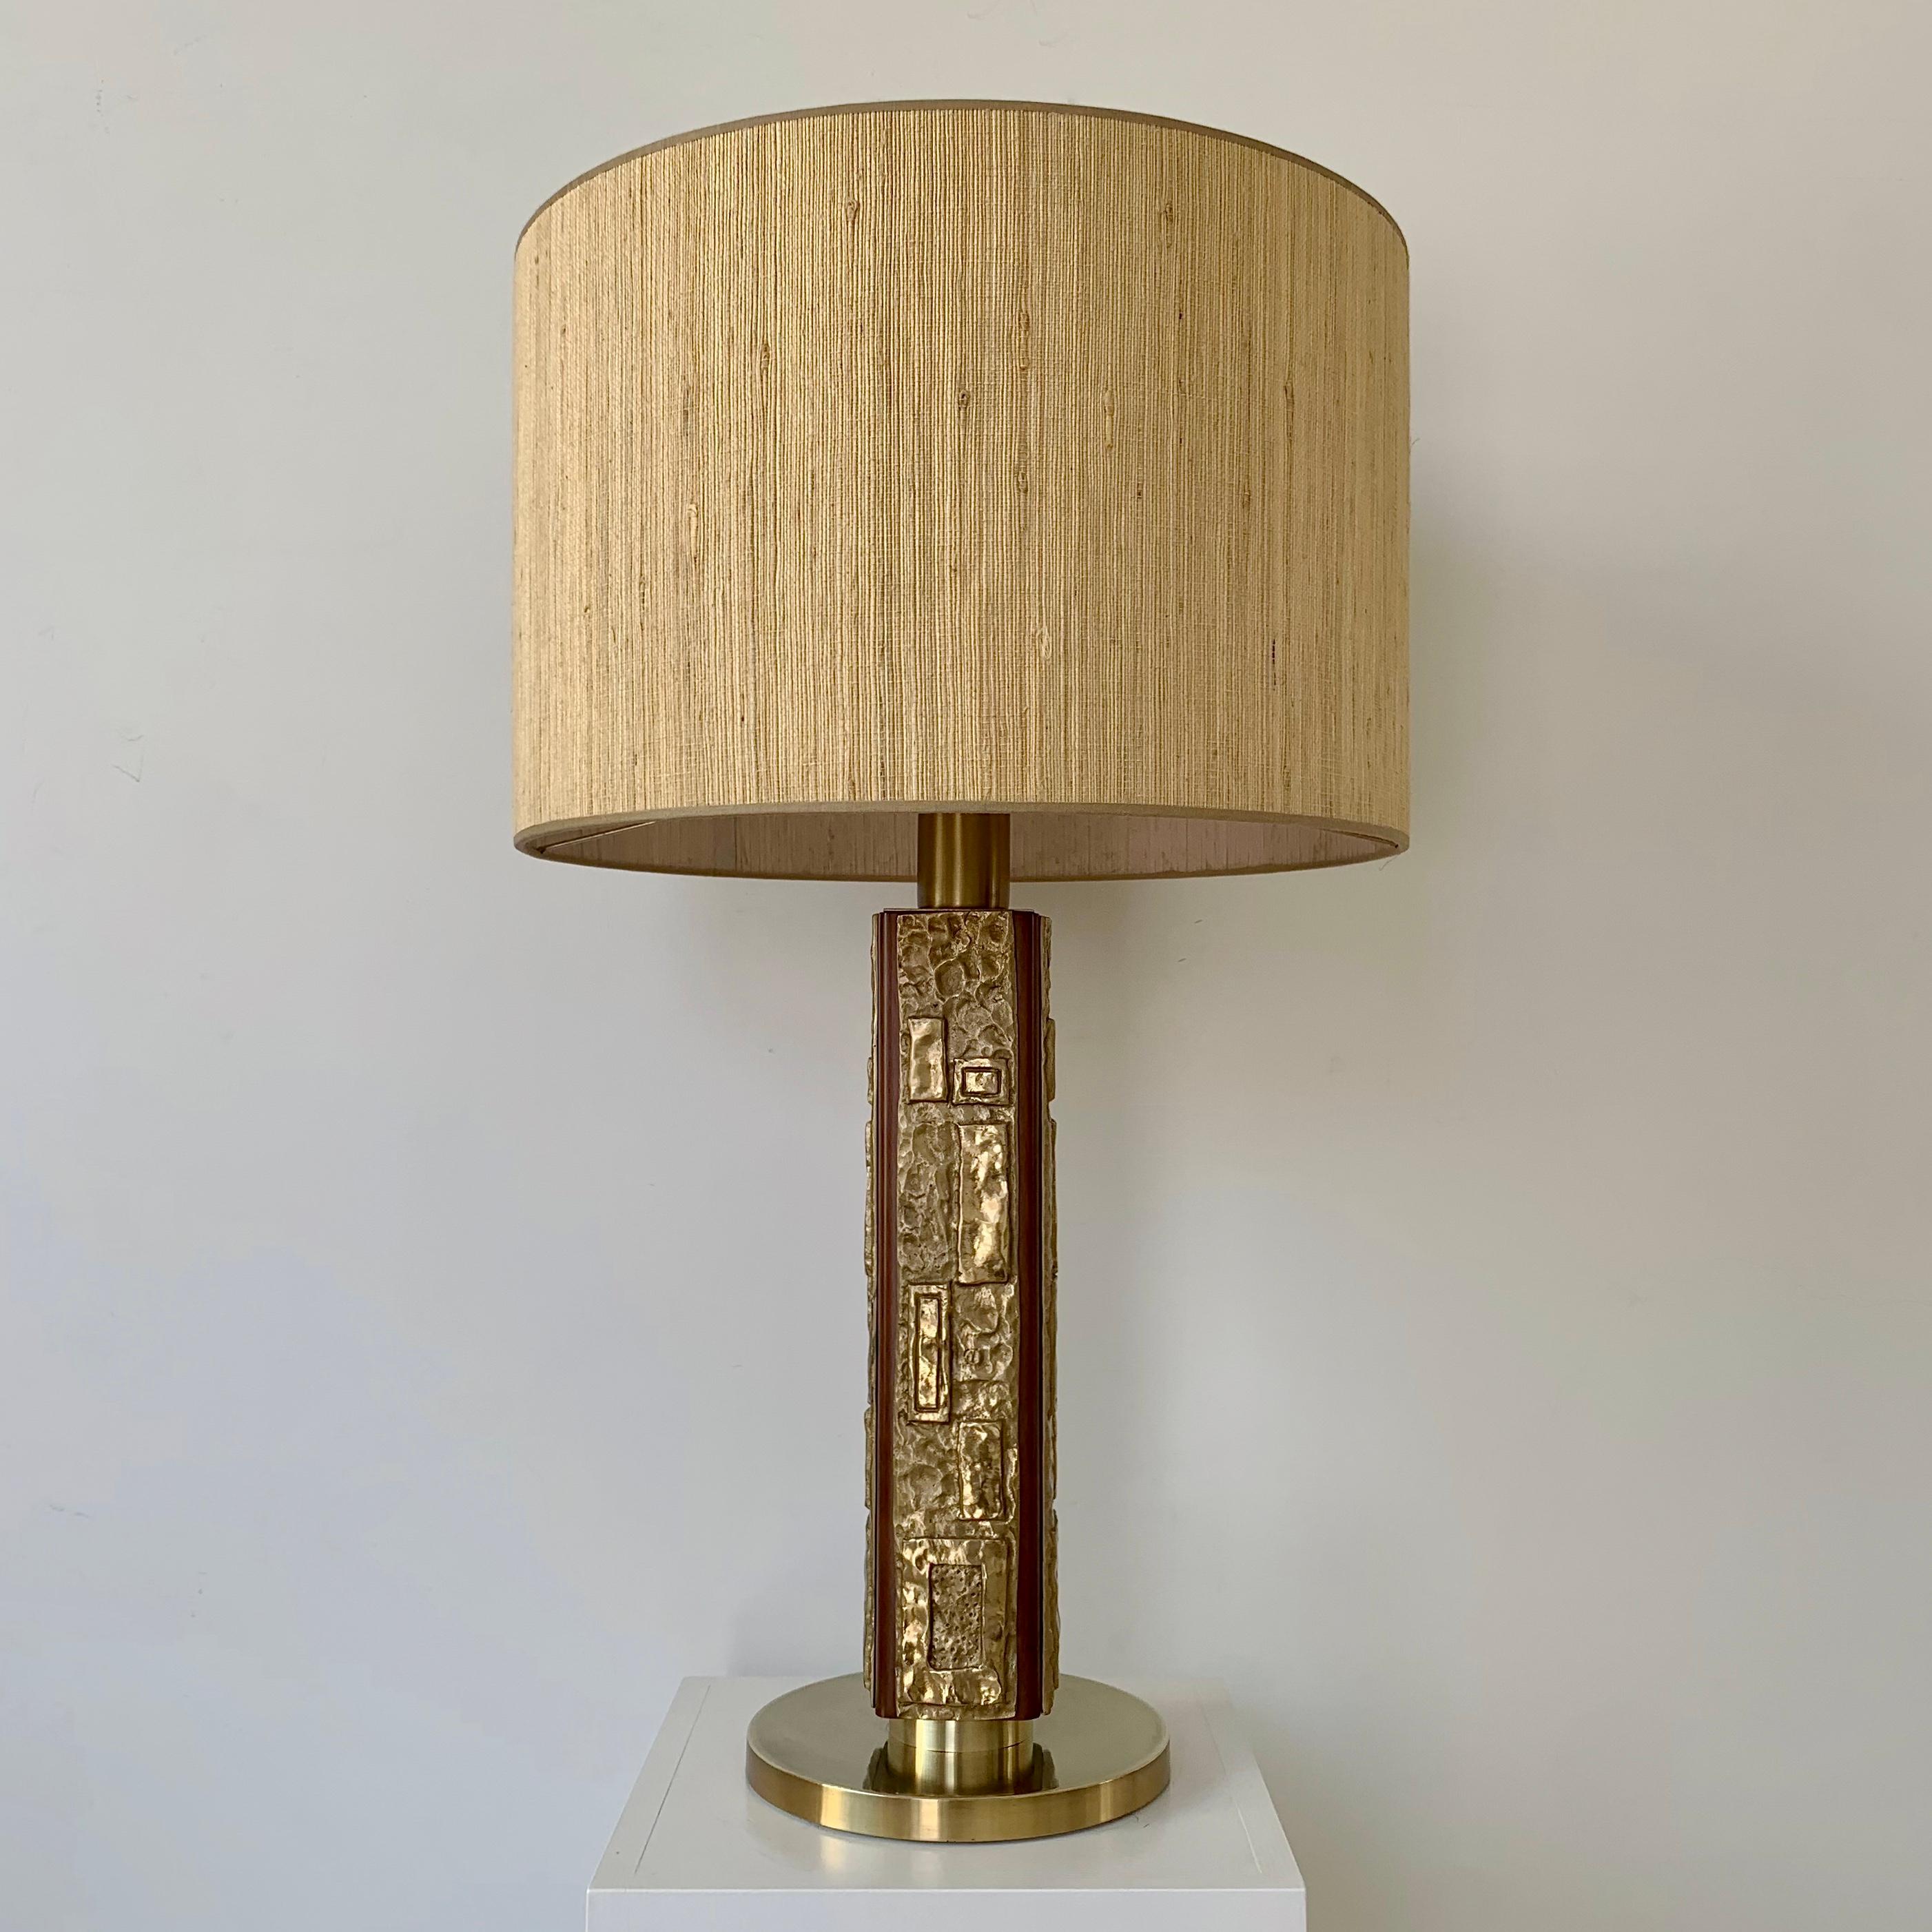 Nice Angelo Brotto signed large table lamp, circa 1970, Italy.
Four bronze plaques with sculptural geometric decor, walnut, brass, and new straw shade.
Good condition. Rewired, E27 bulb.
Dimensions: total height: 72 cm cm, diameter of the shade: